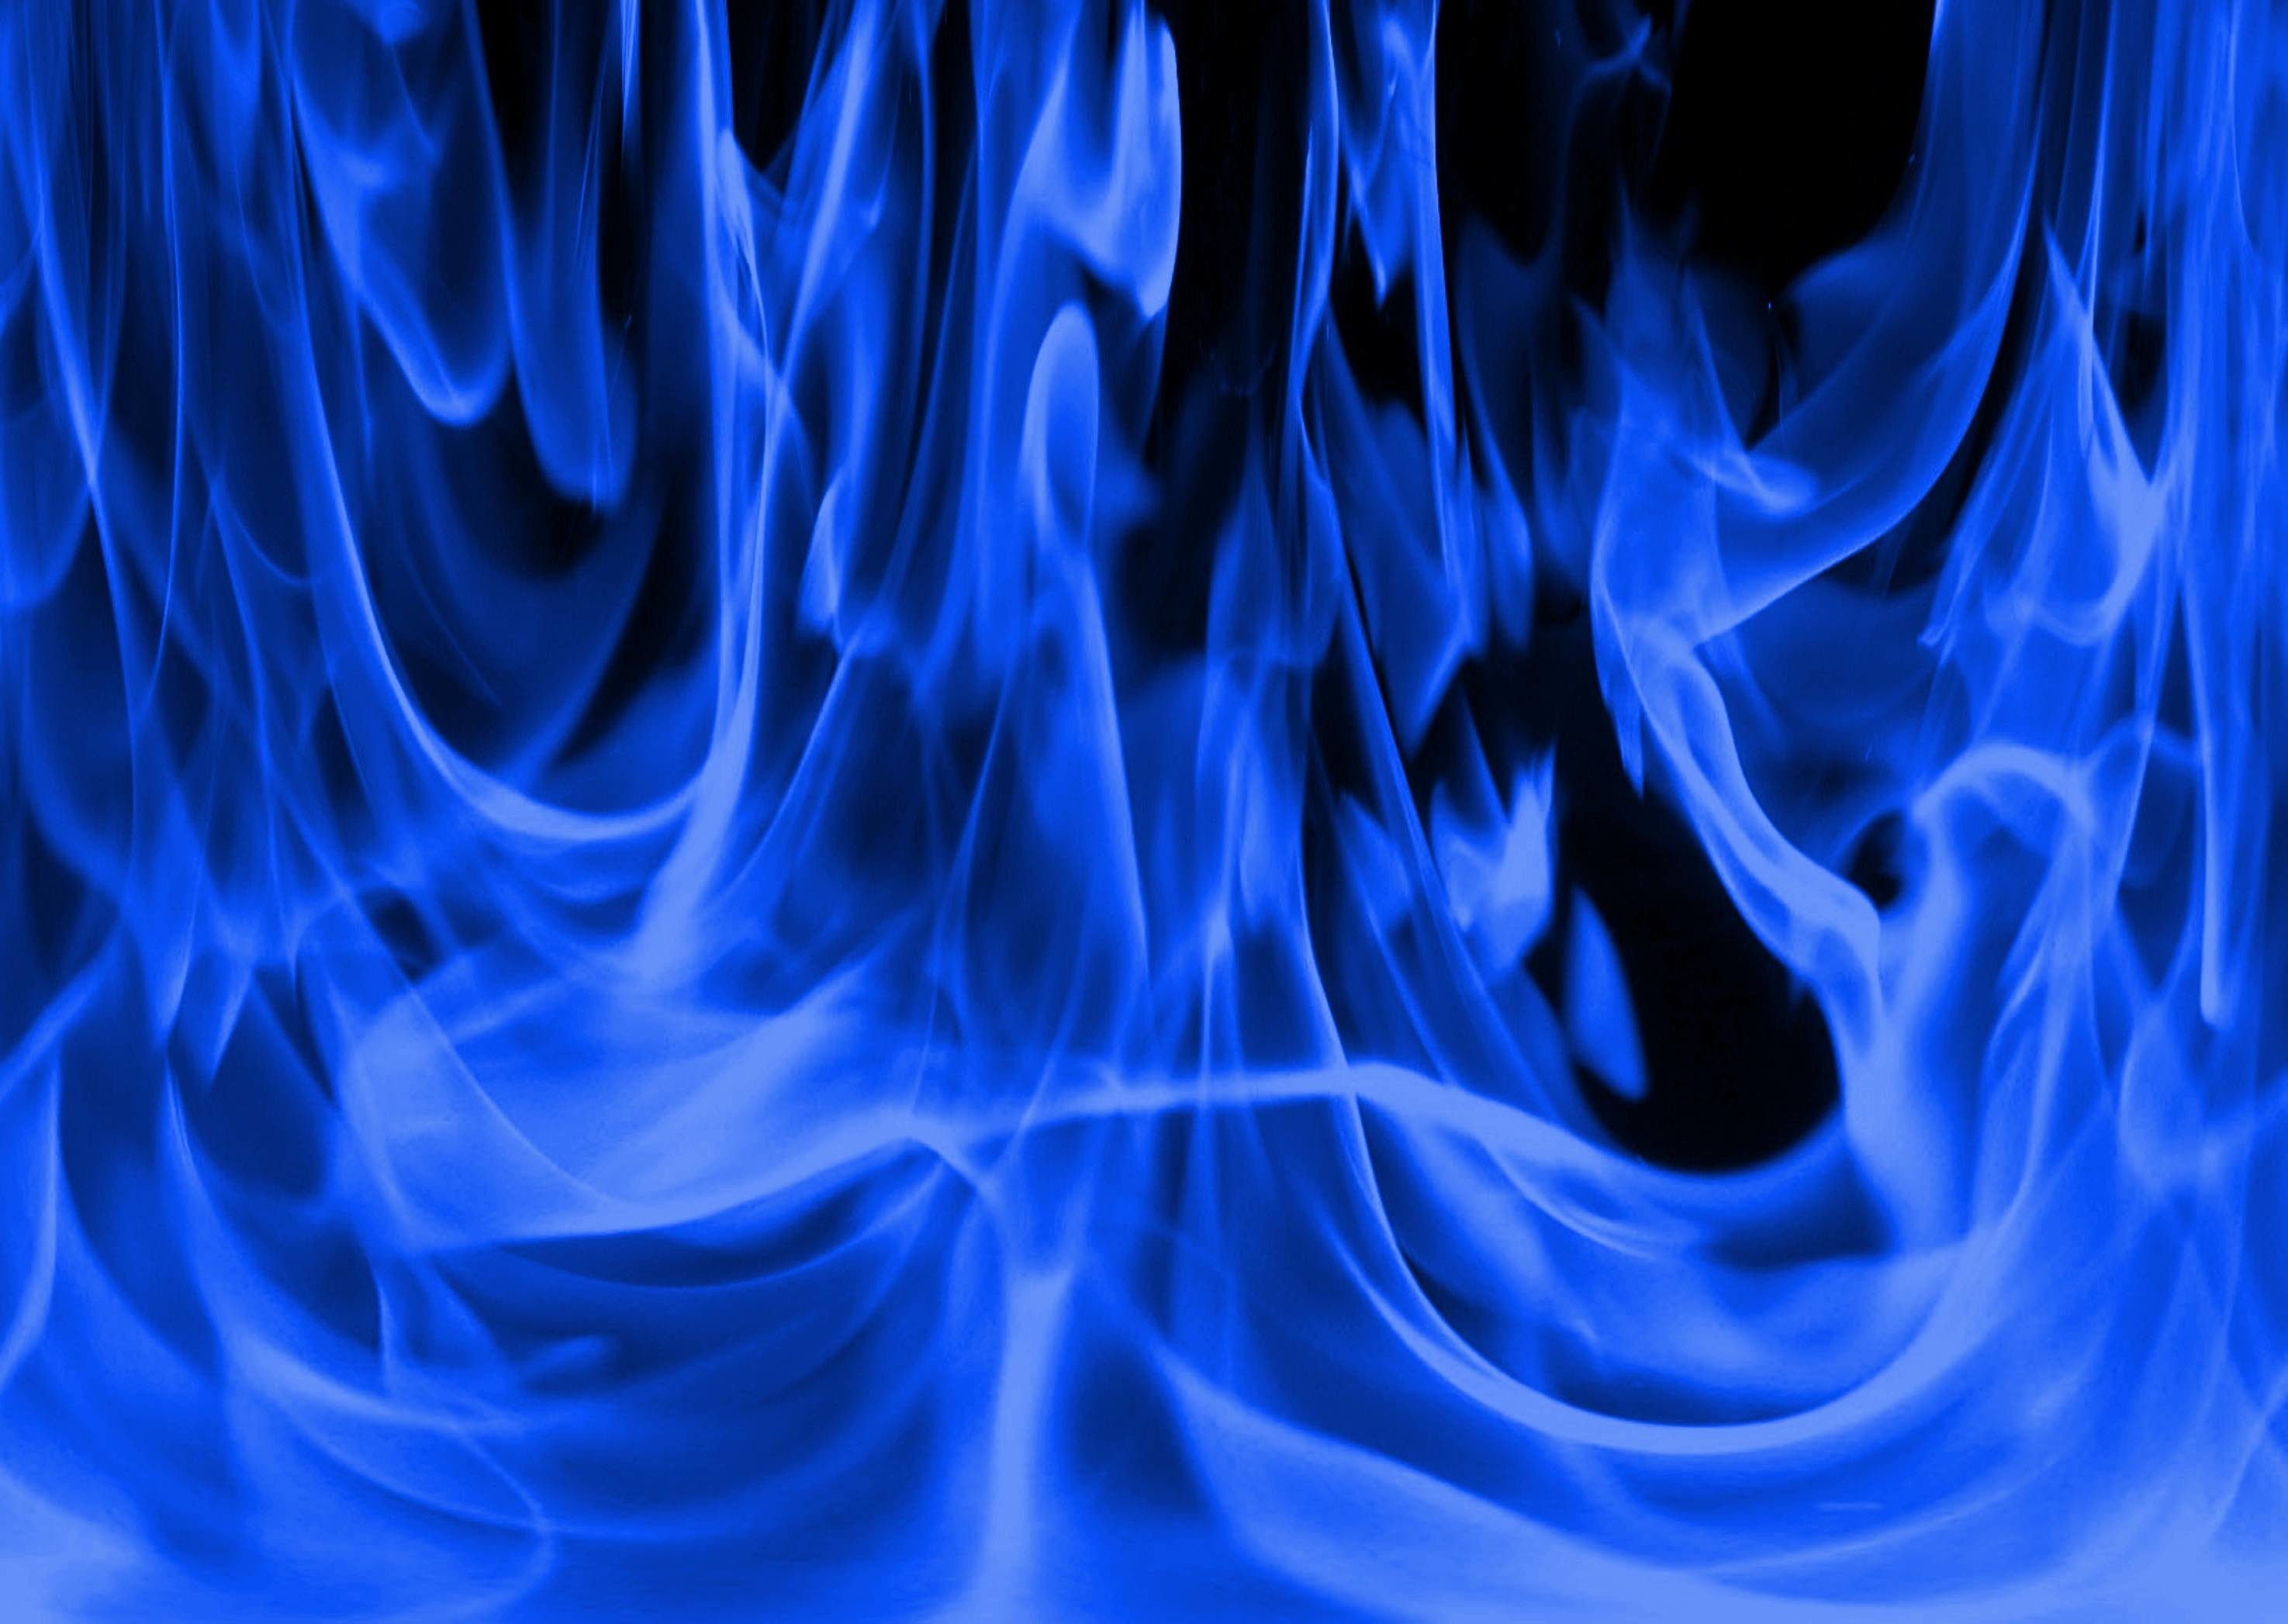 2950x2094 Blue And Red Fire Flames - Viewing Gallery